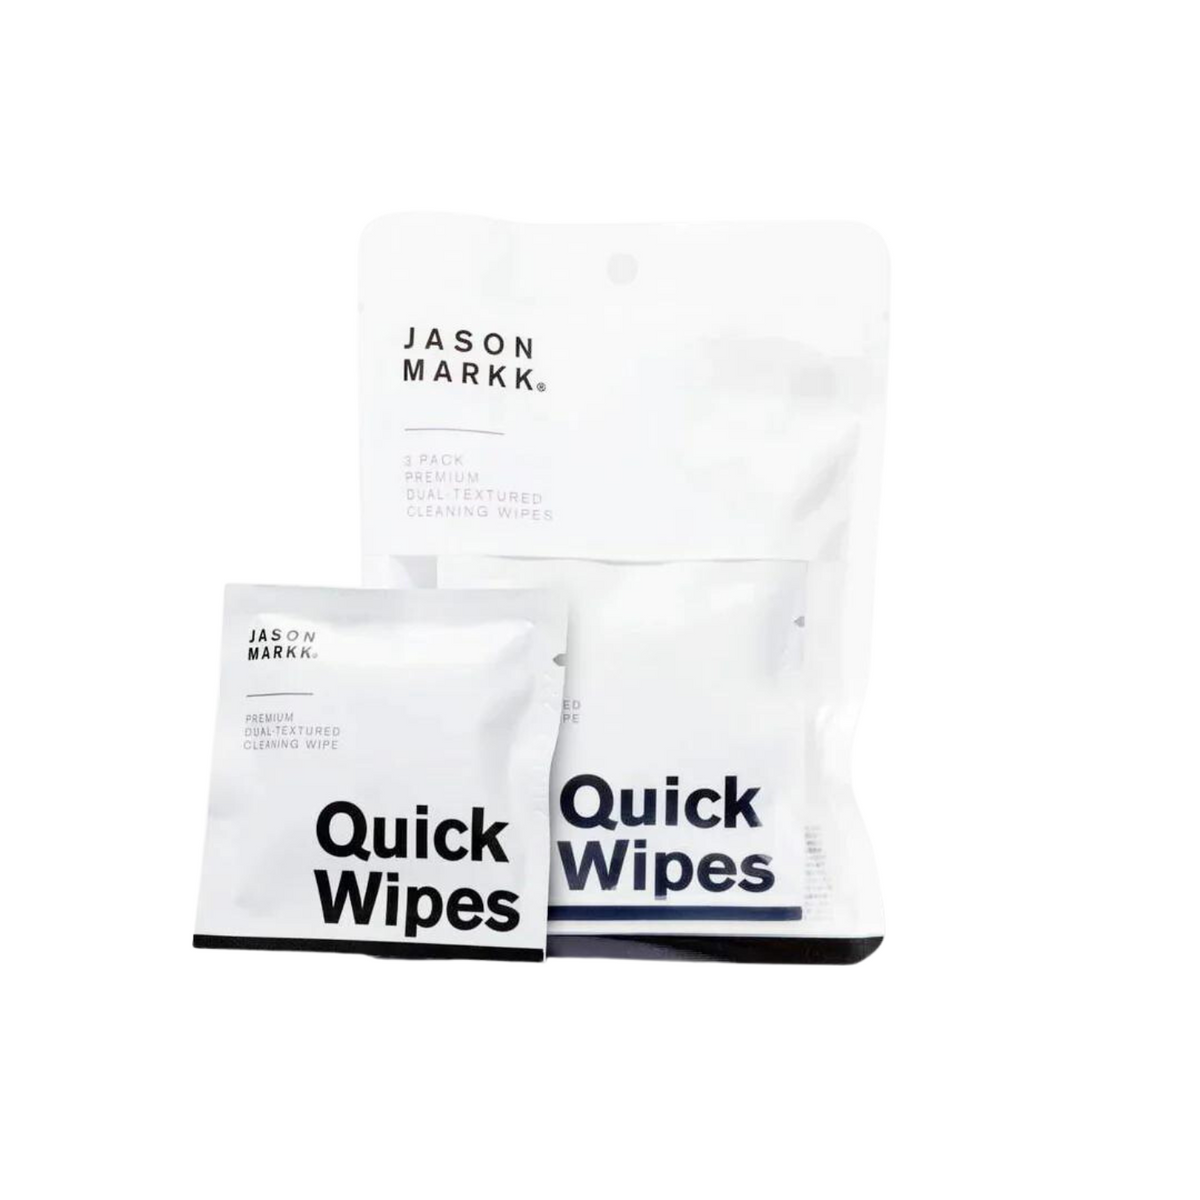 QUICK WIPES 3 PACK - REFRESH